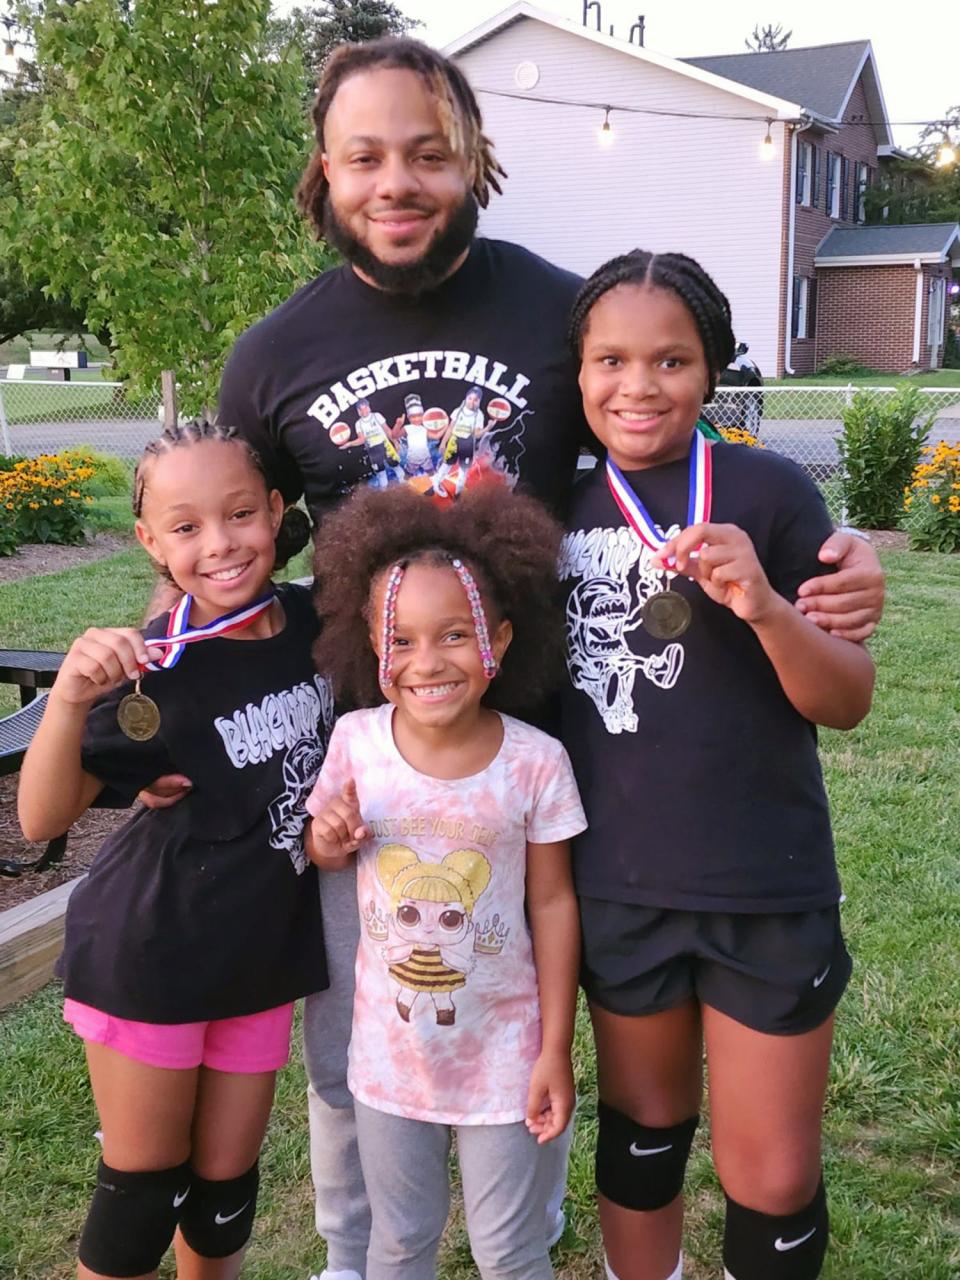 From the left, standing with their father Nathan Fleming is Nathaliz, age 10, Olivia, age 6, and Za'Miya, age 10. 